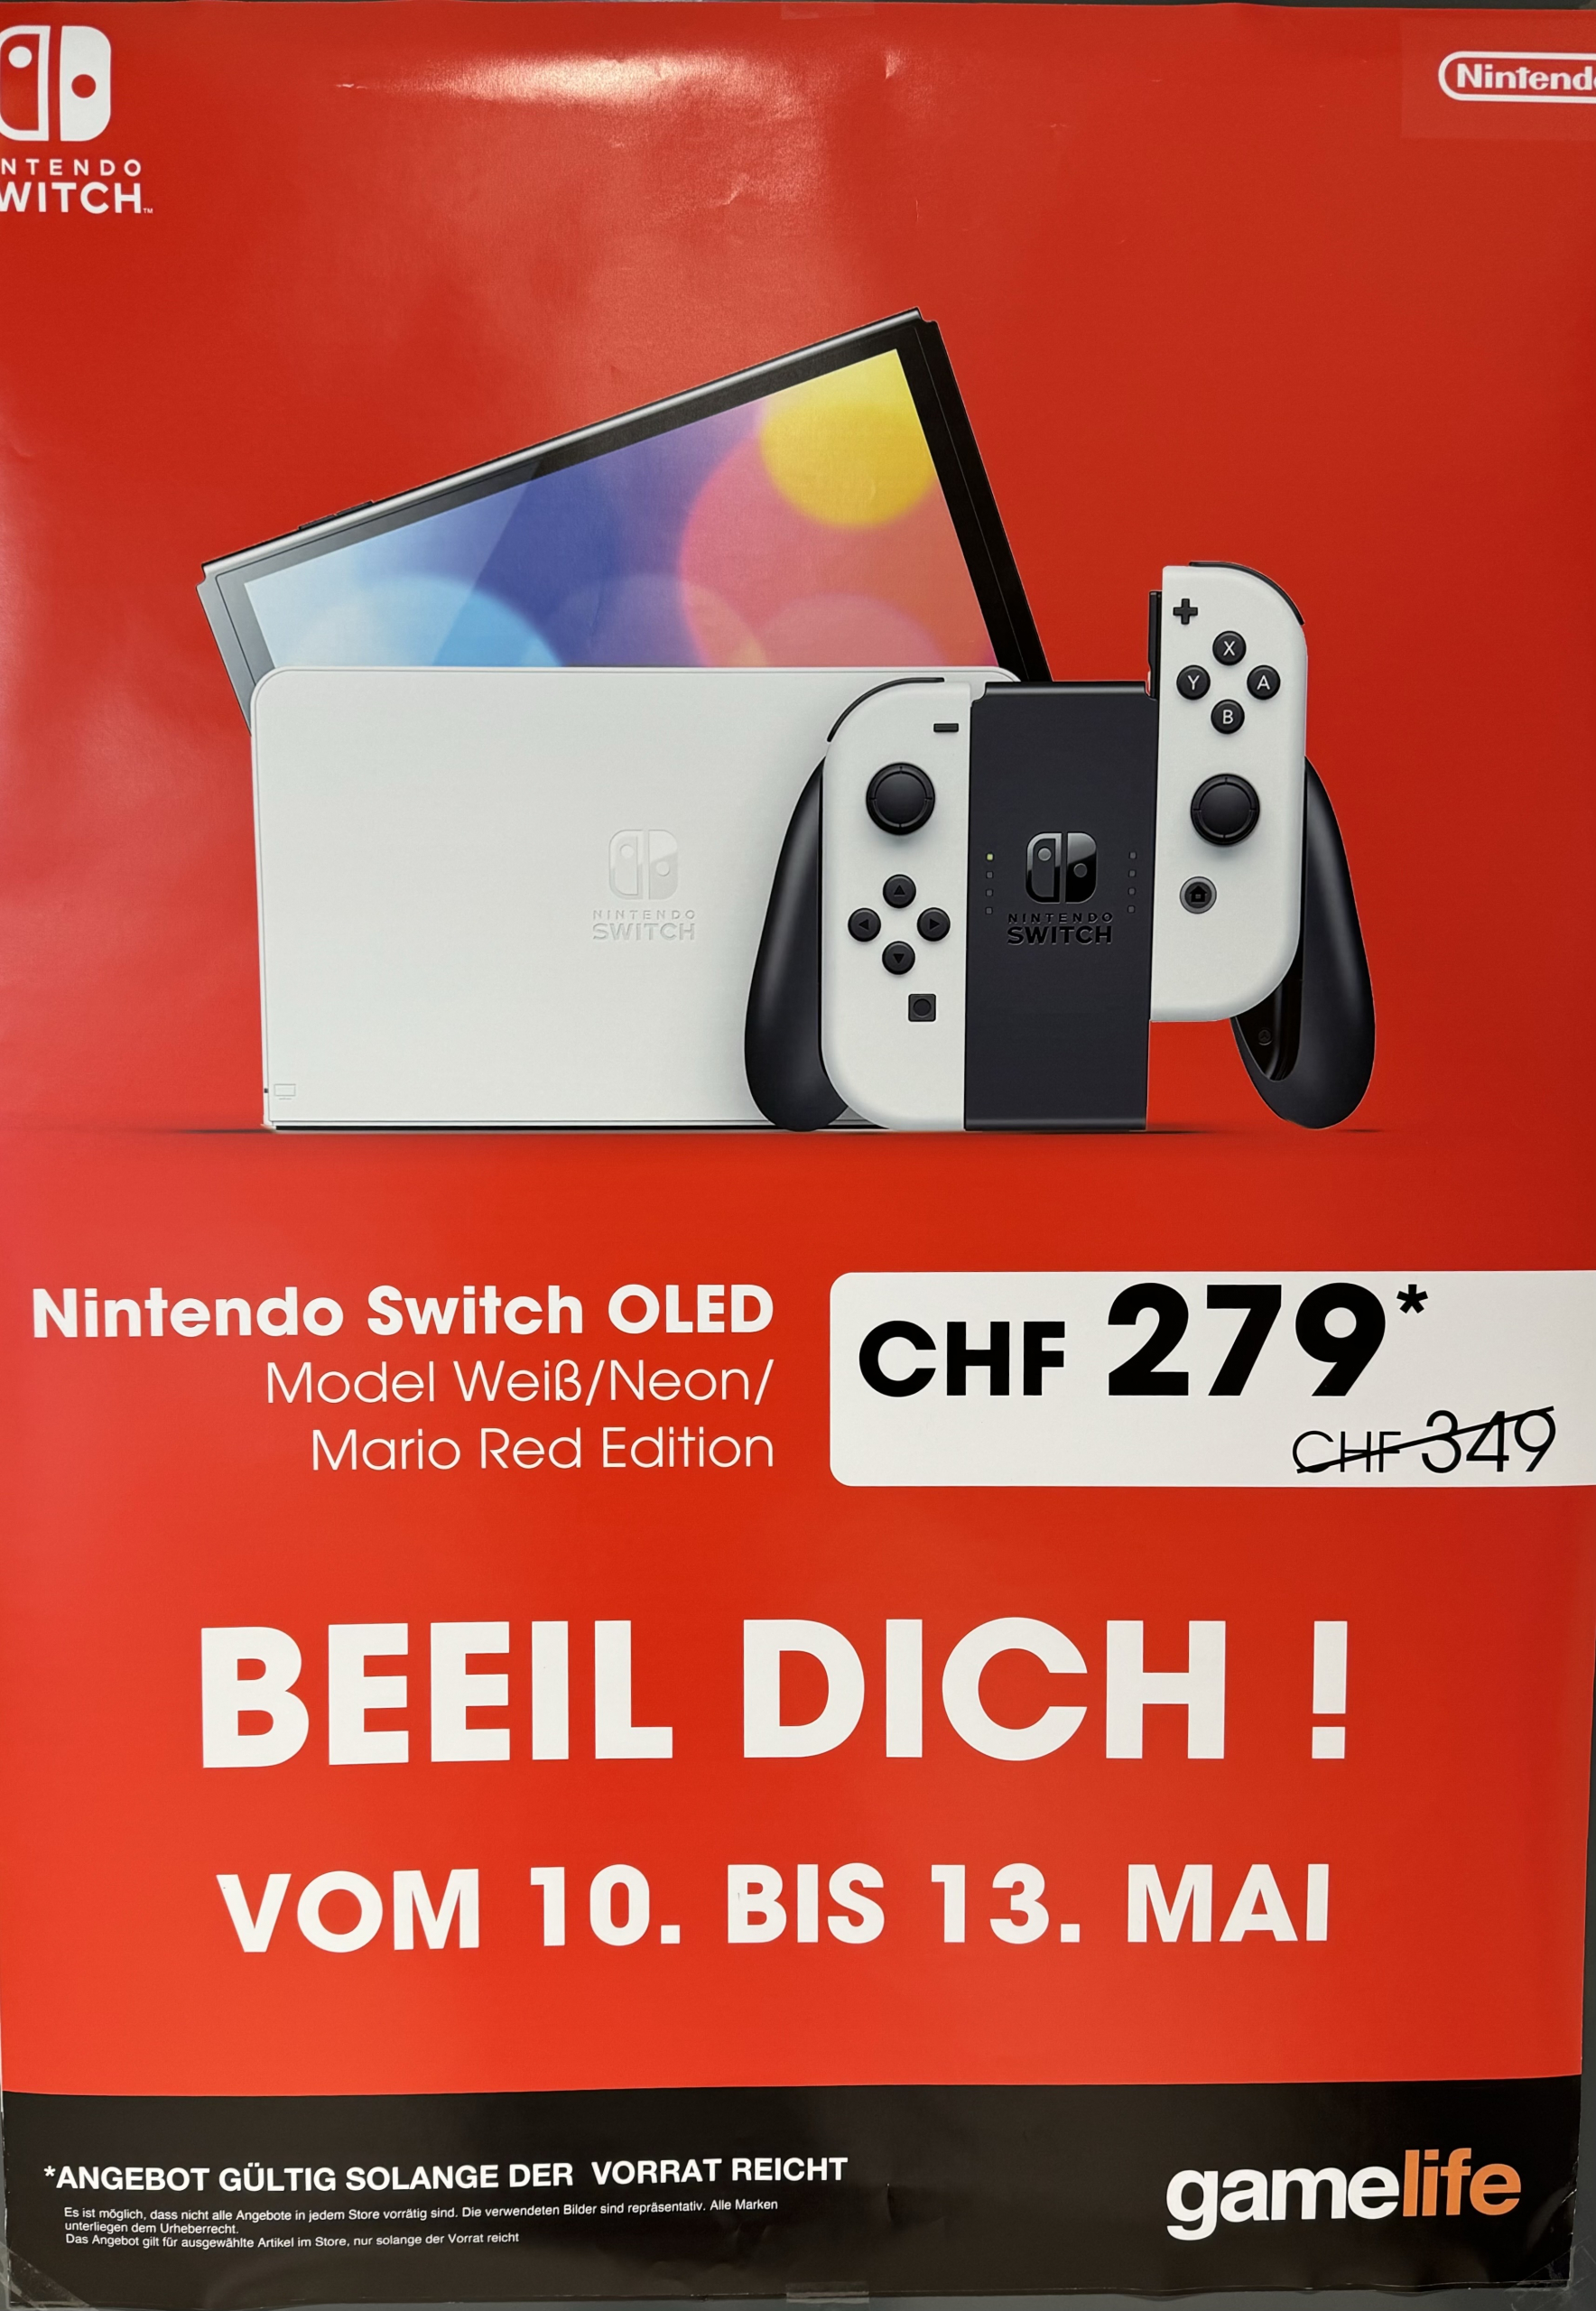 Nintendo Switch OLED Neon/Weiss/Mario Red